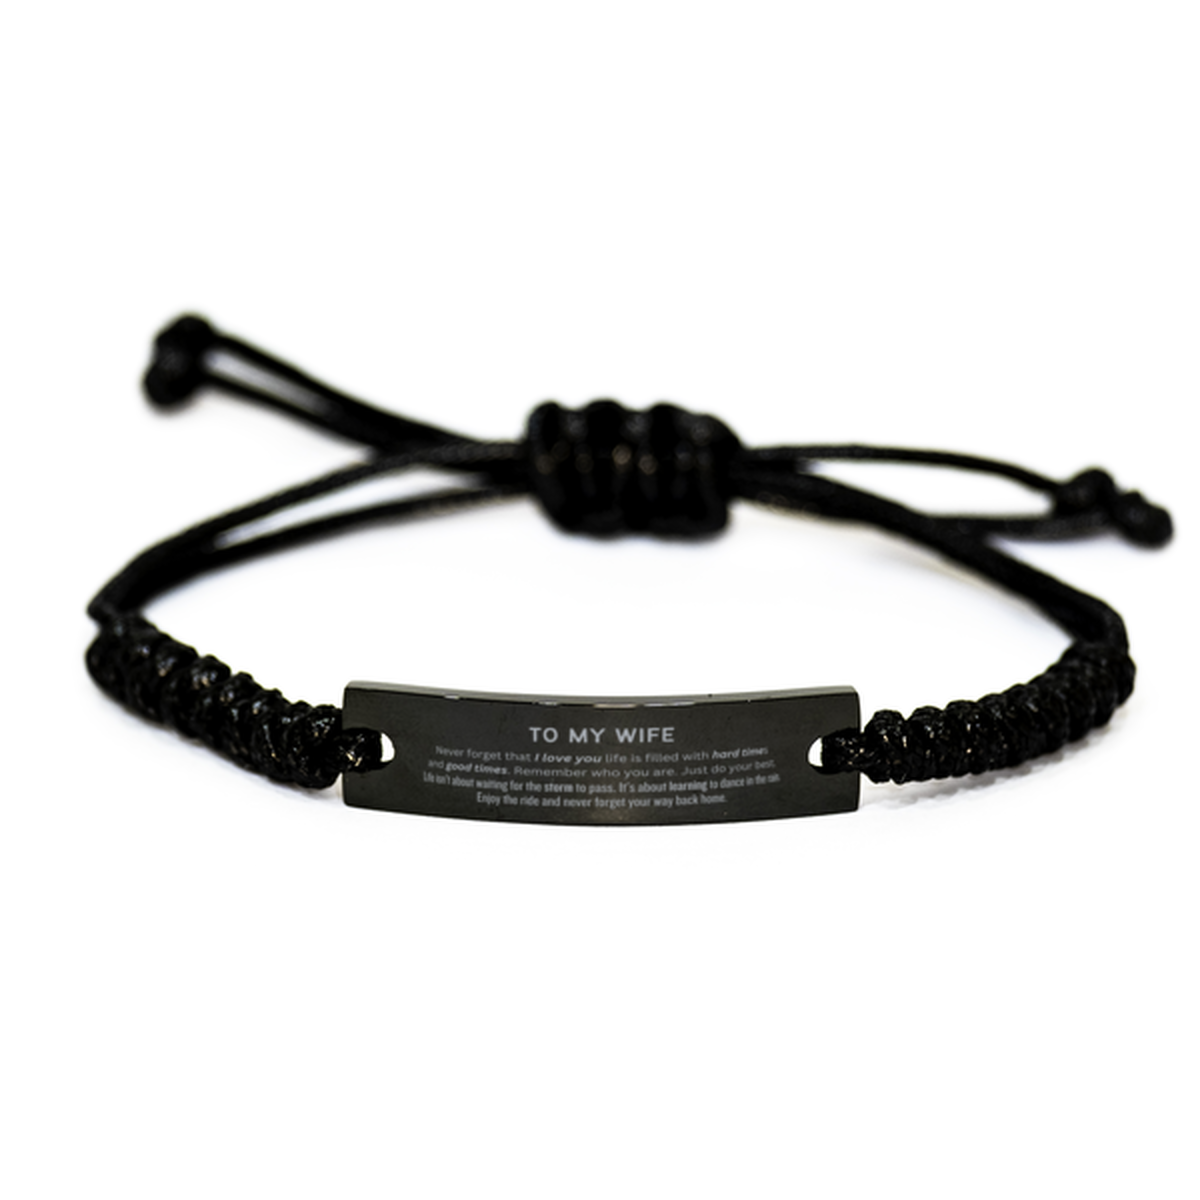 Christmas Wife Black Rope Bracelet Gifts, To My Wife Birthday Thank You Gifts For Wife, Graduation Unique Gifts For Wife To My Wife Never forget that I love you life is filled with hard times and good times. Remember who you are. Just do your best